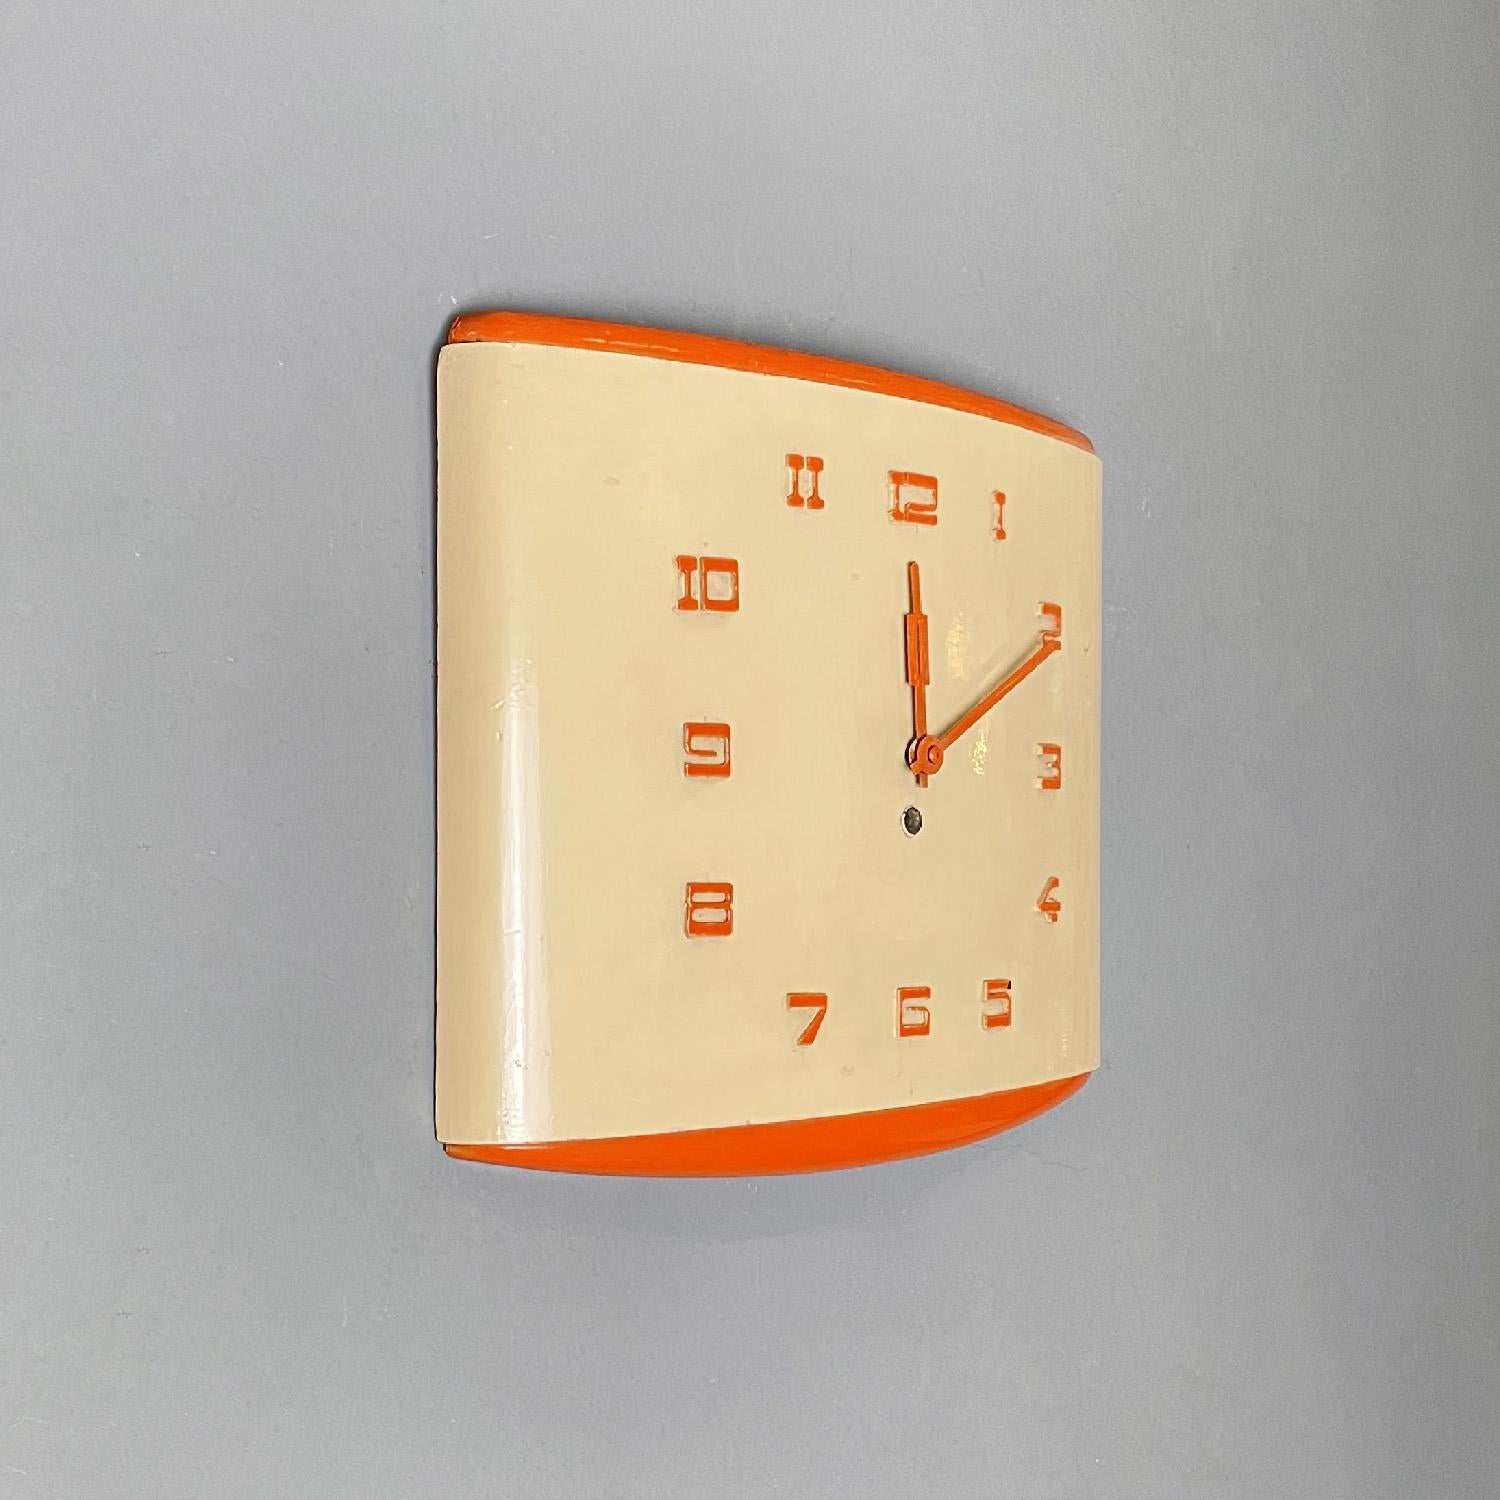 Italian mid-century modern orange and beige rectangular wall clock, 1960s
Rectangular wall clock in cream yellow and orange lacquered wood. The structure is slightly domed and rounded toward the outside. It has slightly thick numbers that are made